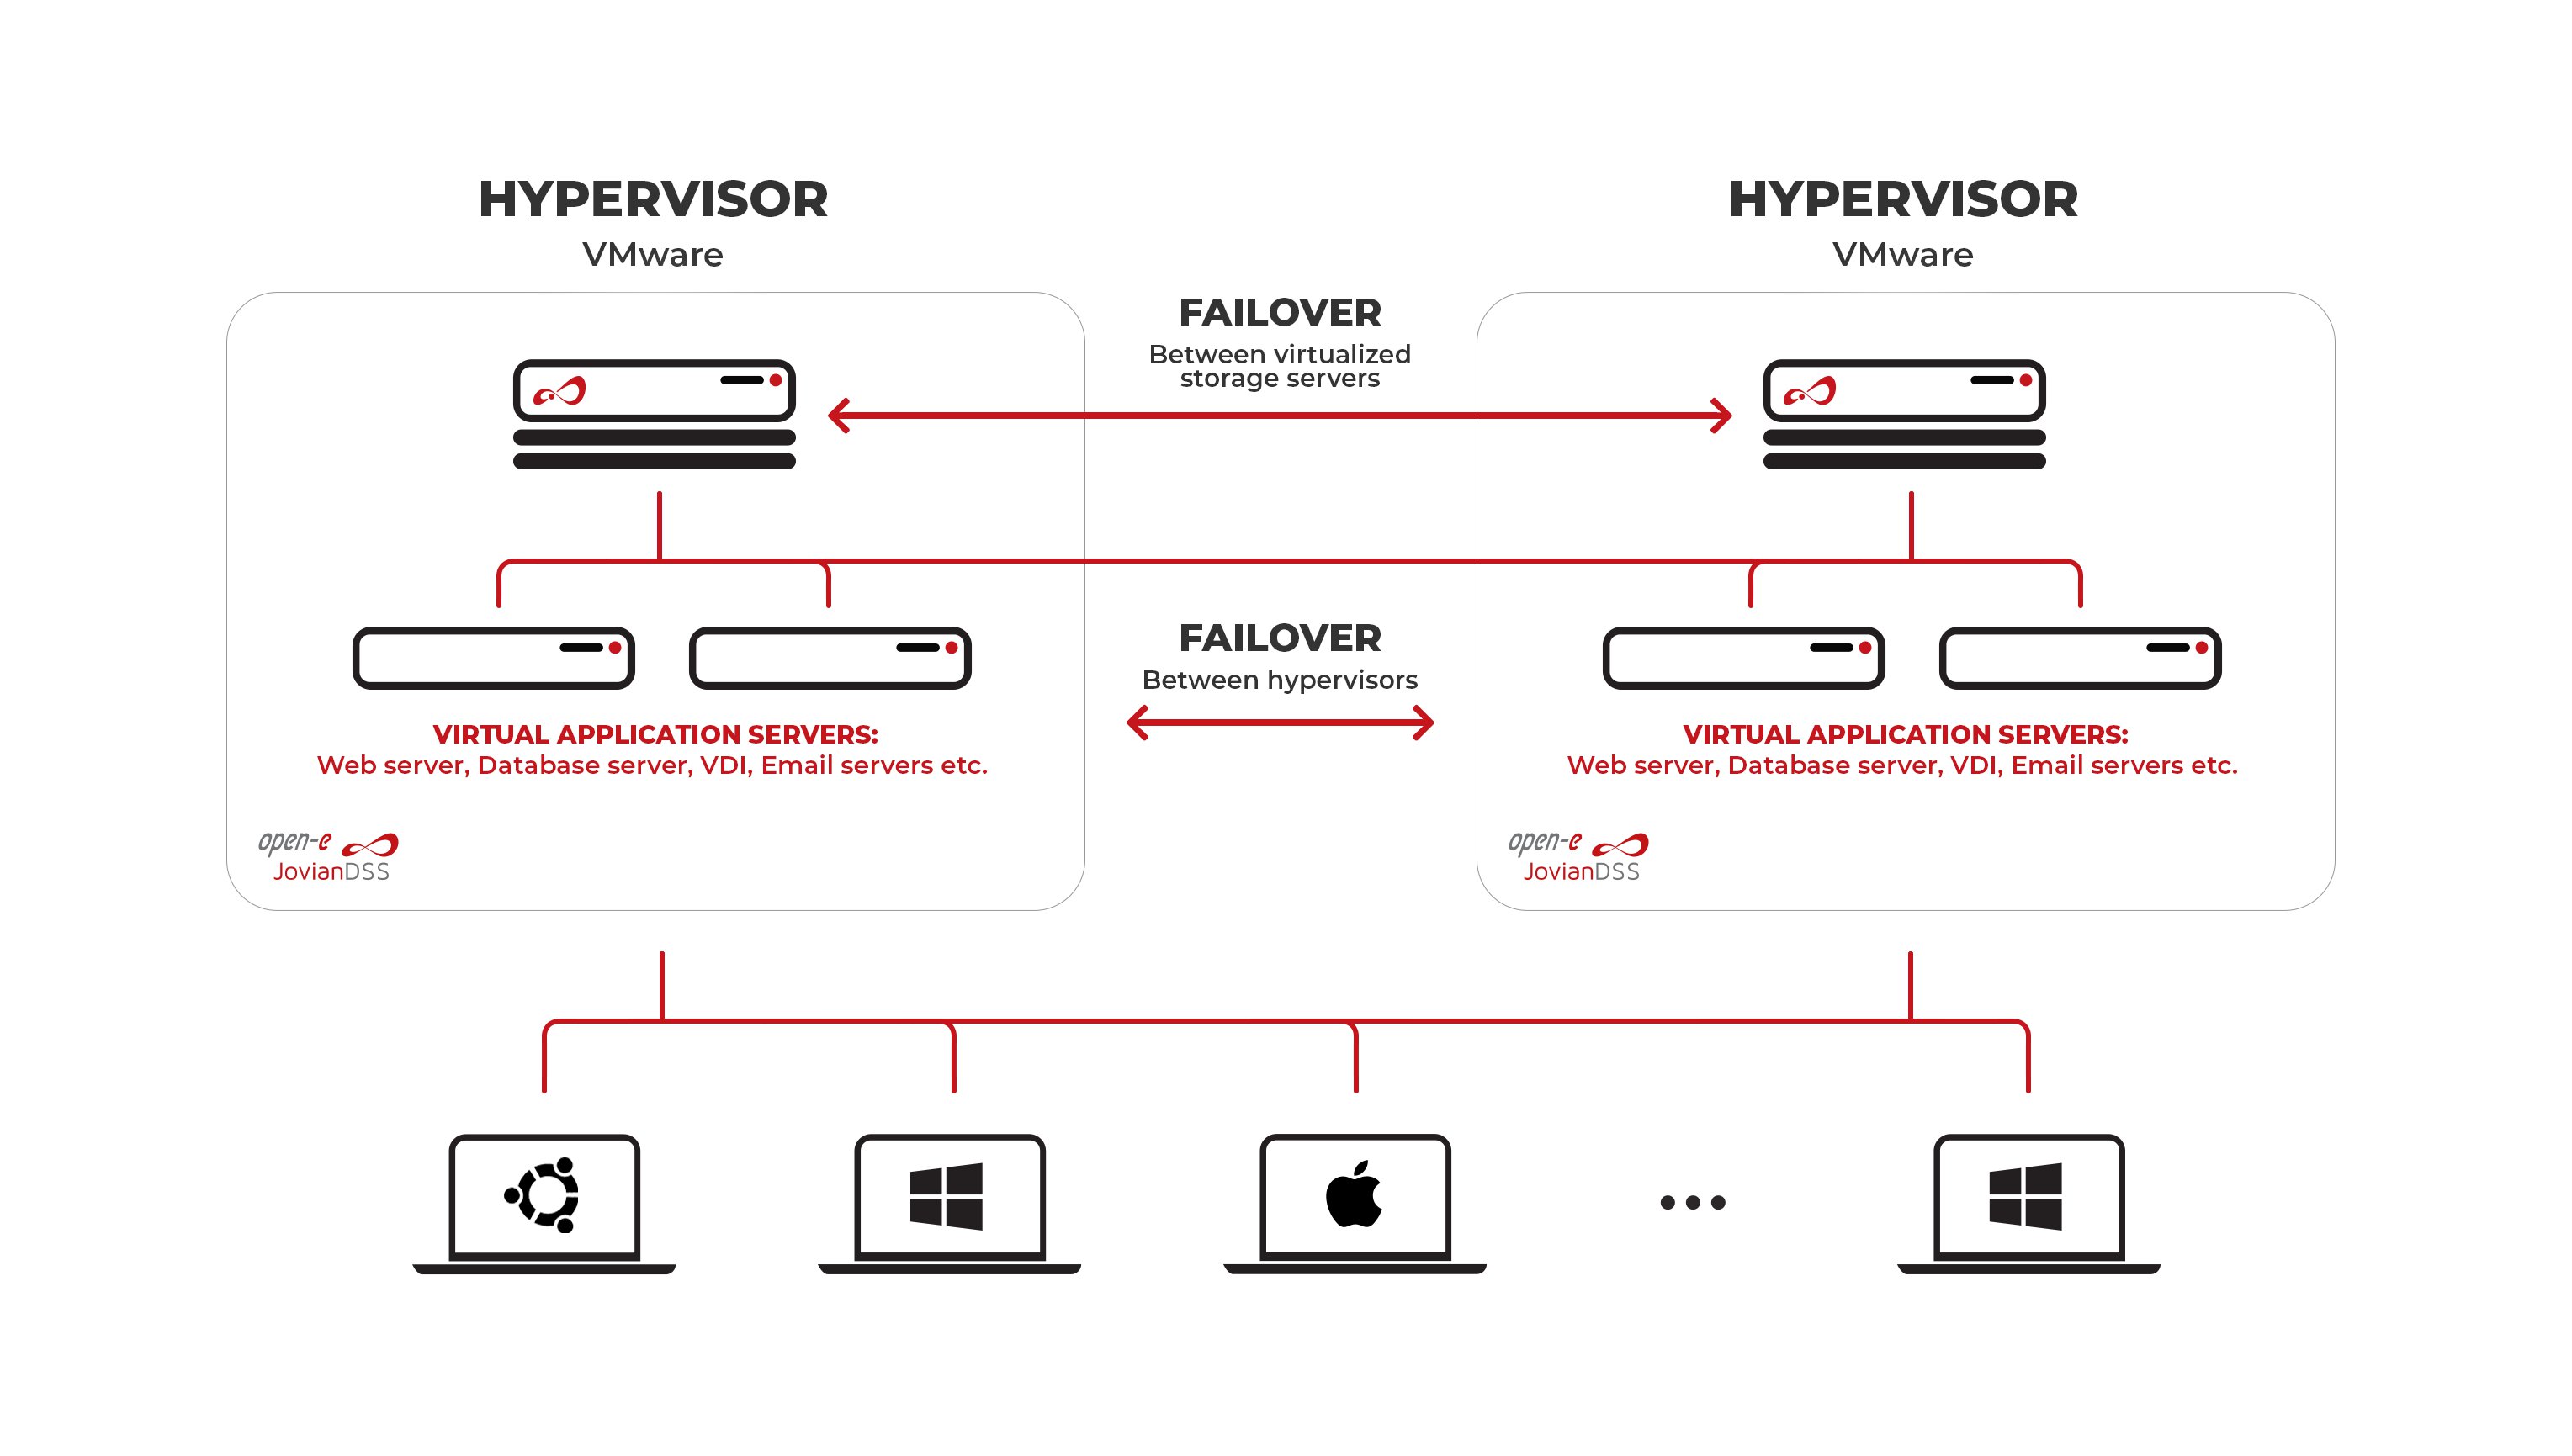 Open-E JovianDSS as Virtualized Storage Within a HA Cluster of VMware Hypervisors scheme